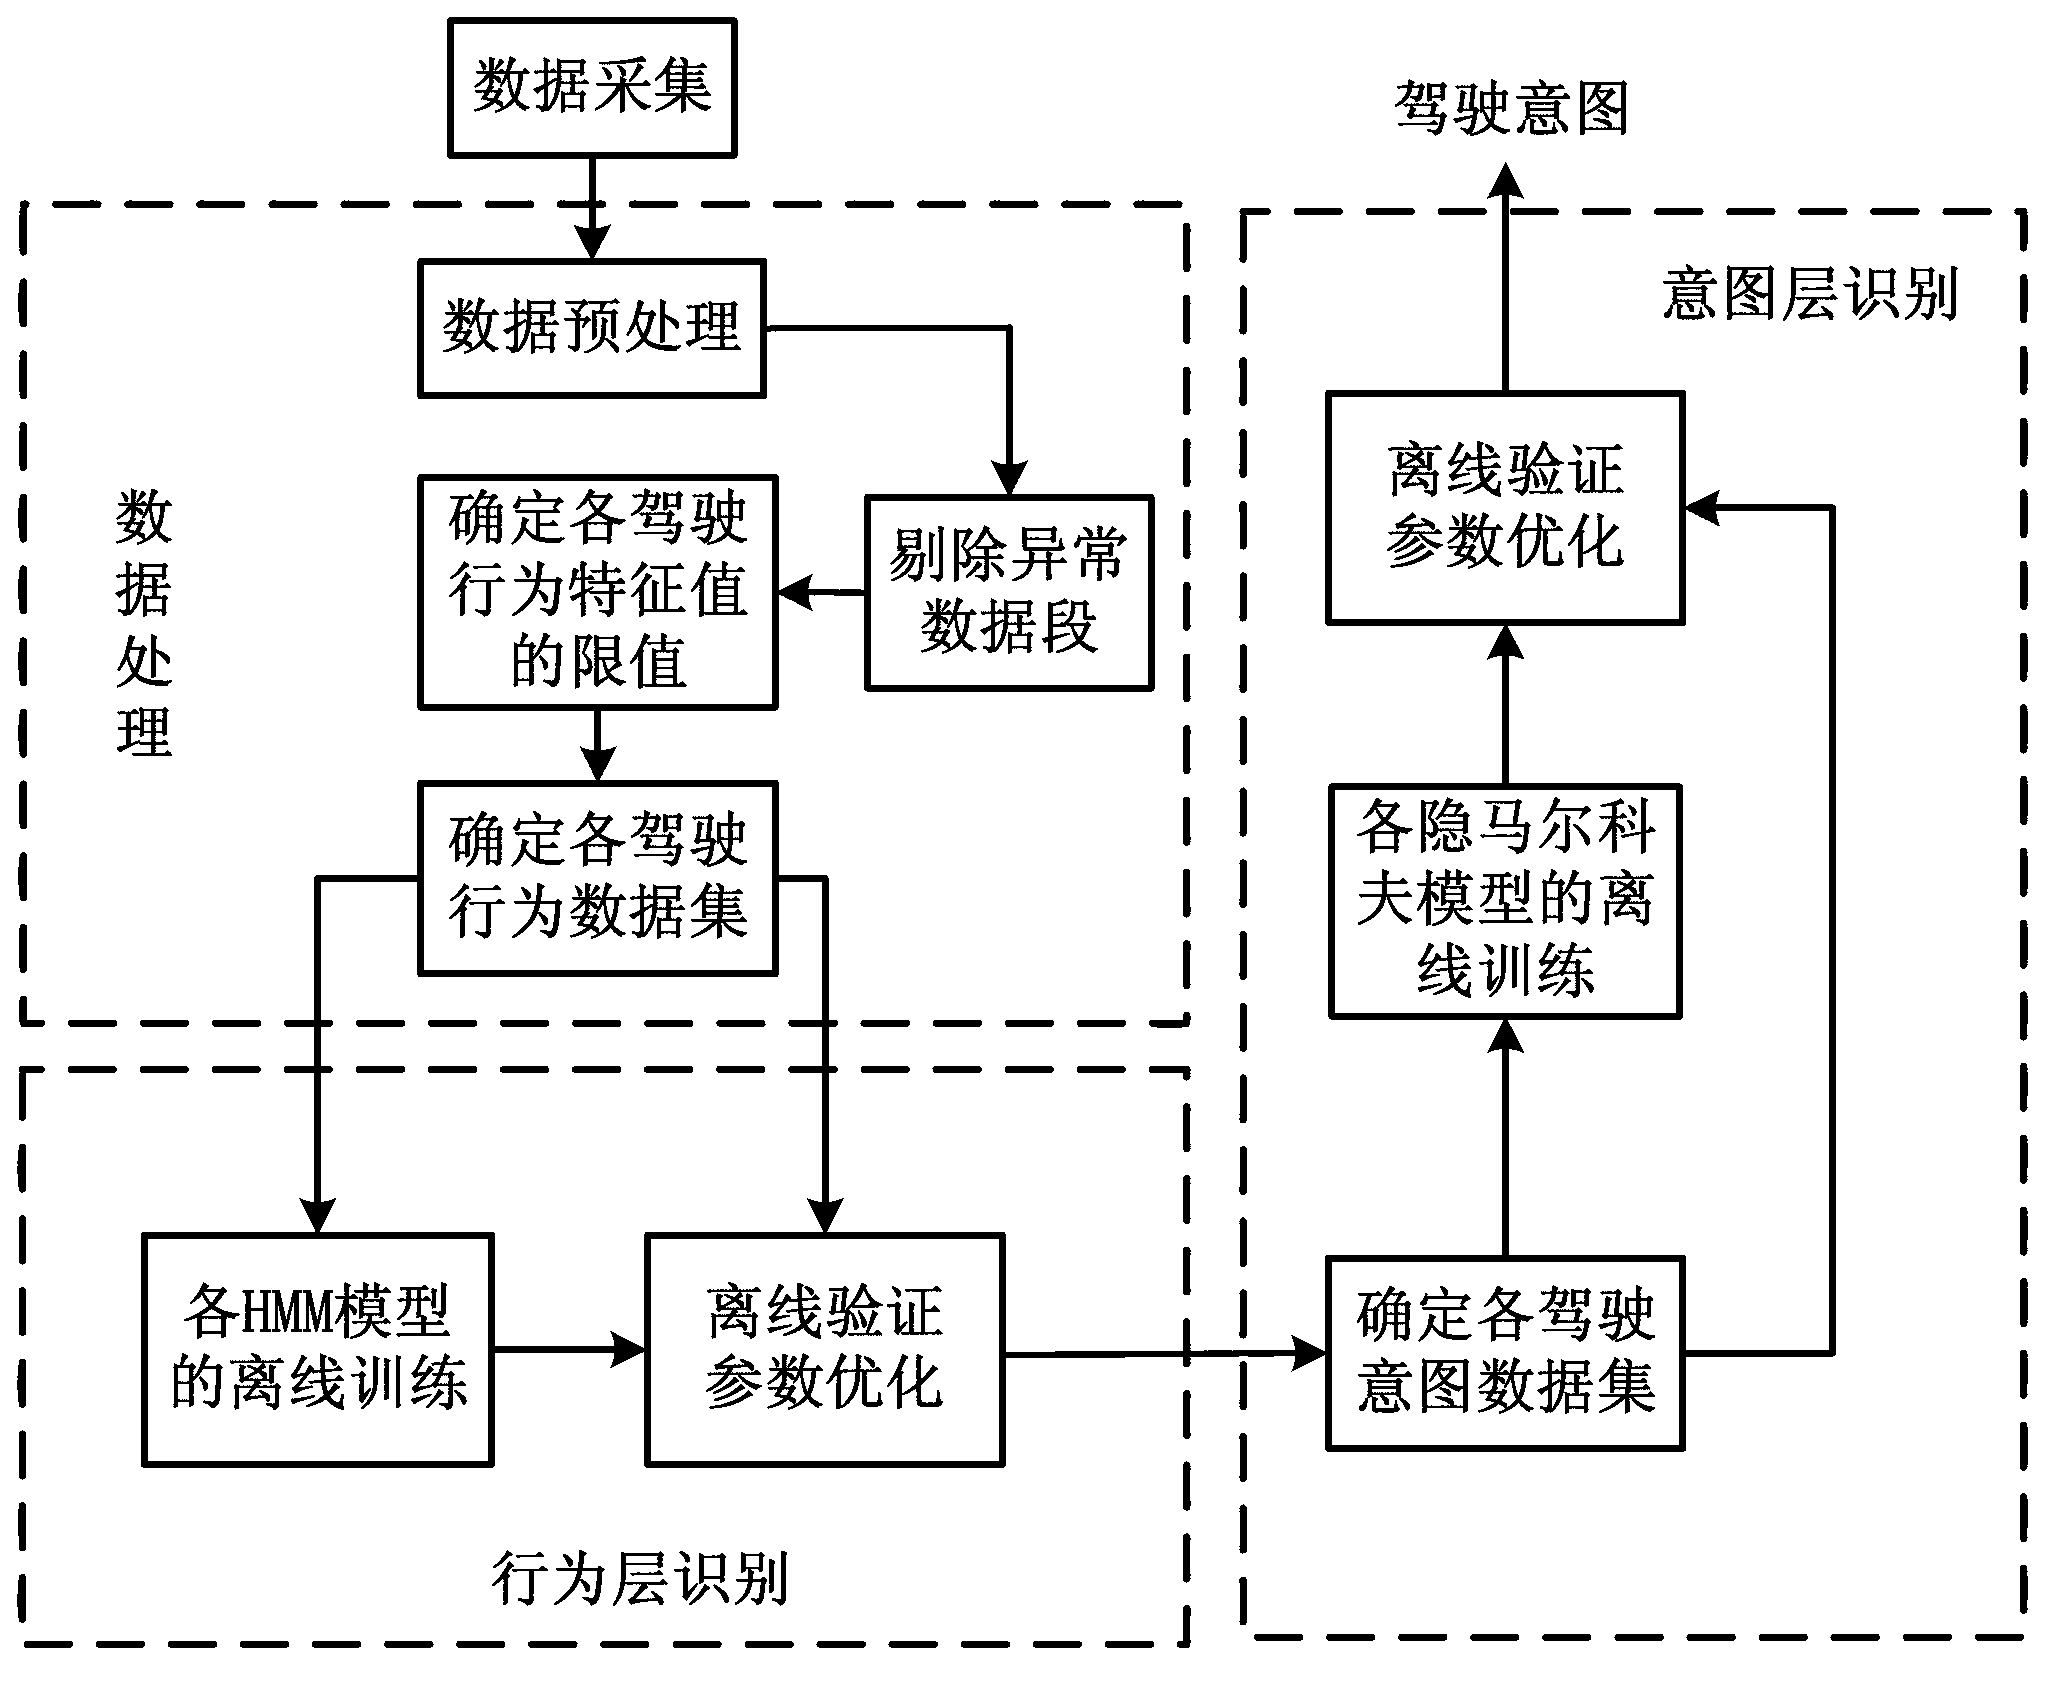 Driver intention recognition method